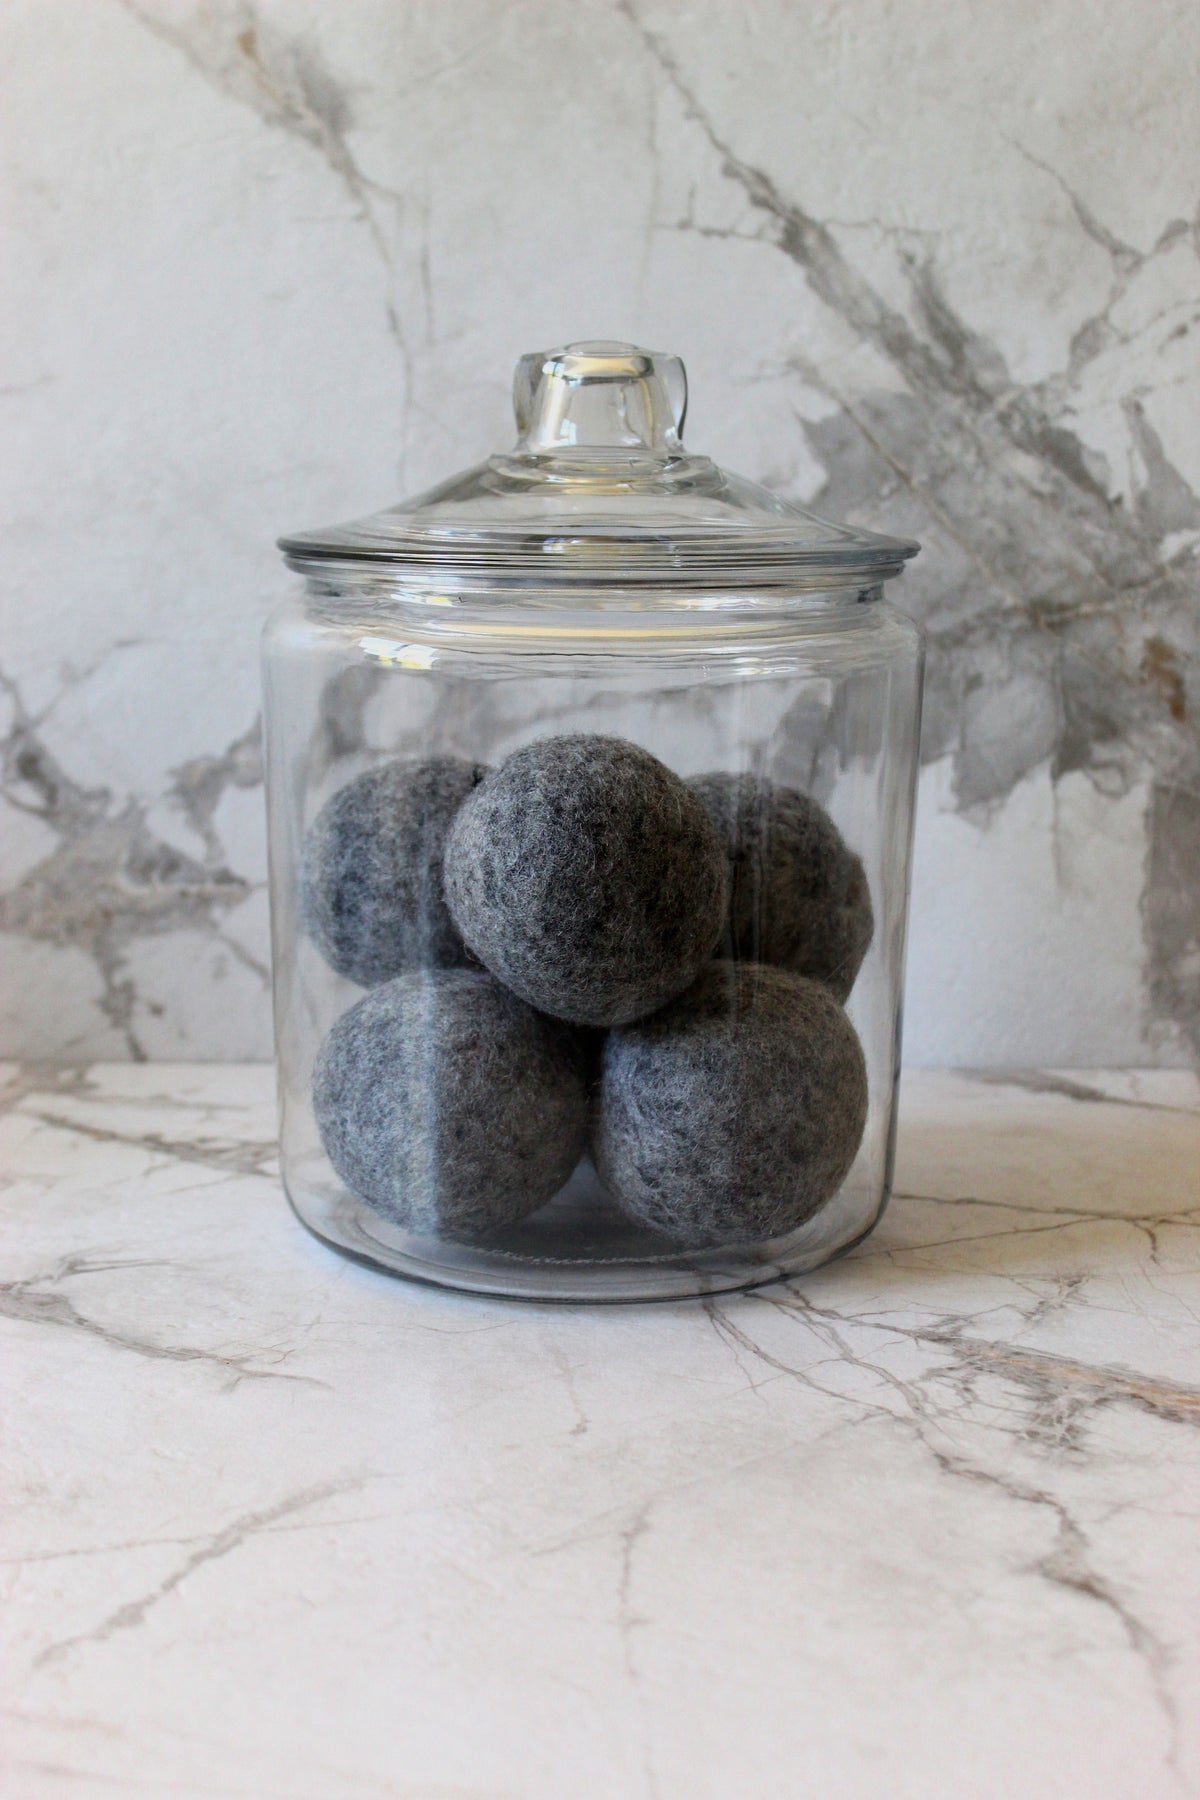 PURSONIC Wool Dryer Balls Bundle - Reusable Laundry Balls Made From Pure  New Zealand Wool - Includes Lavender & Peppermint Oils - White - 22  requests